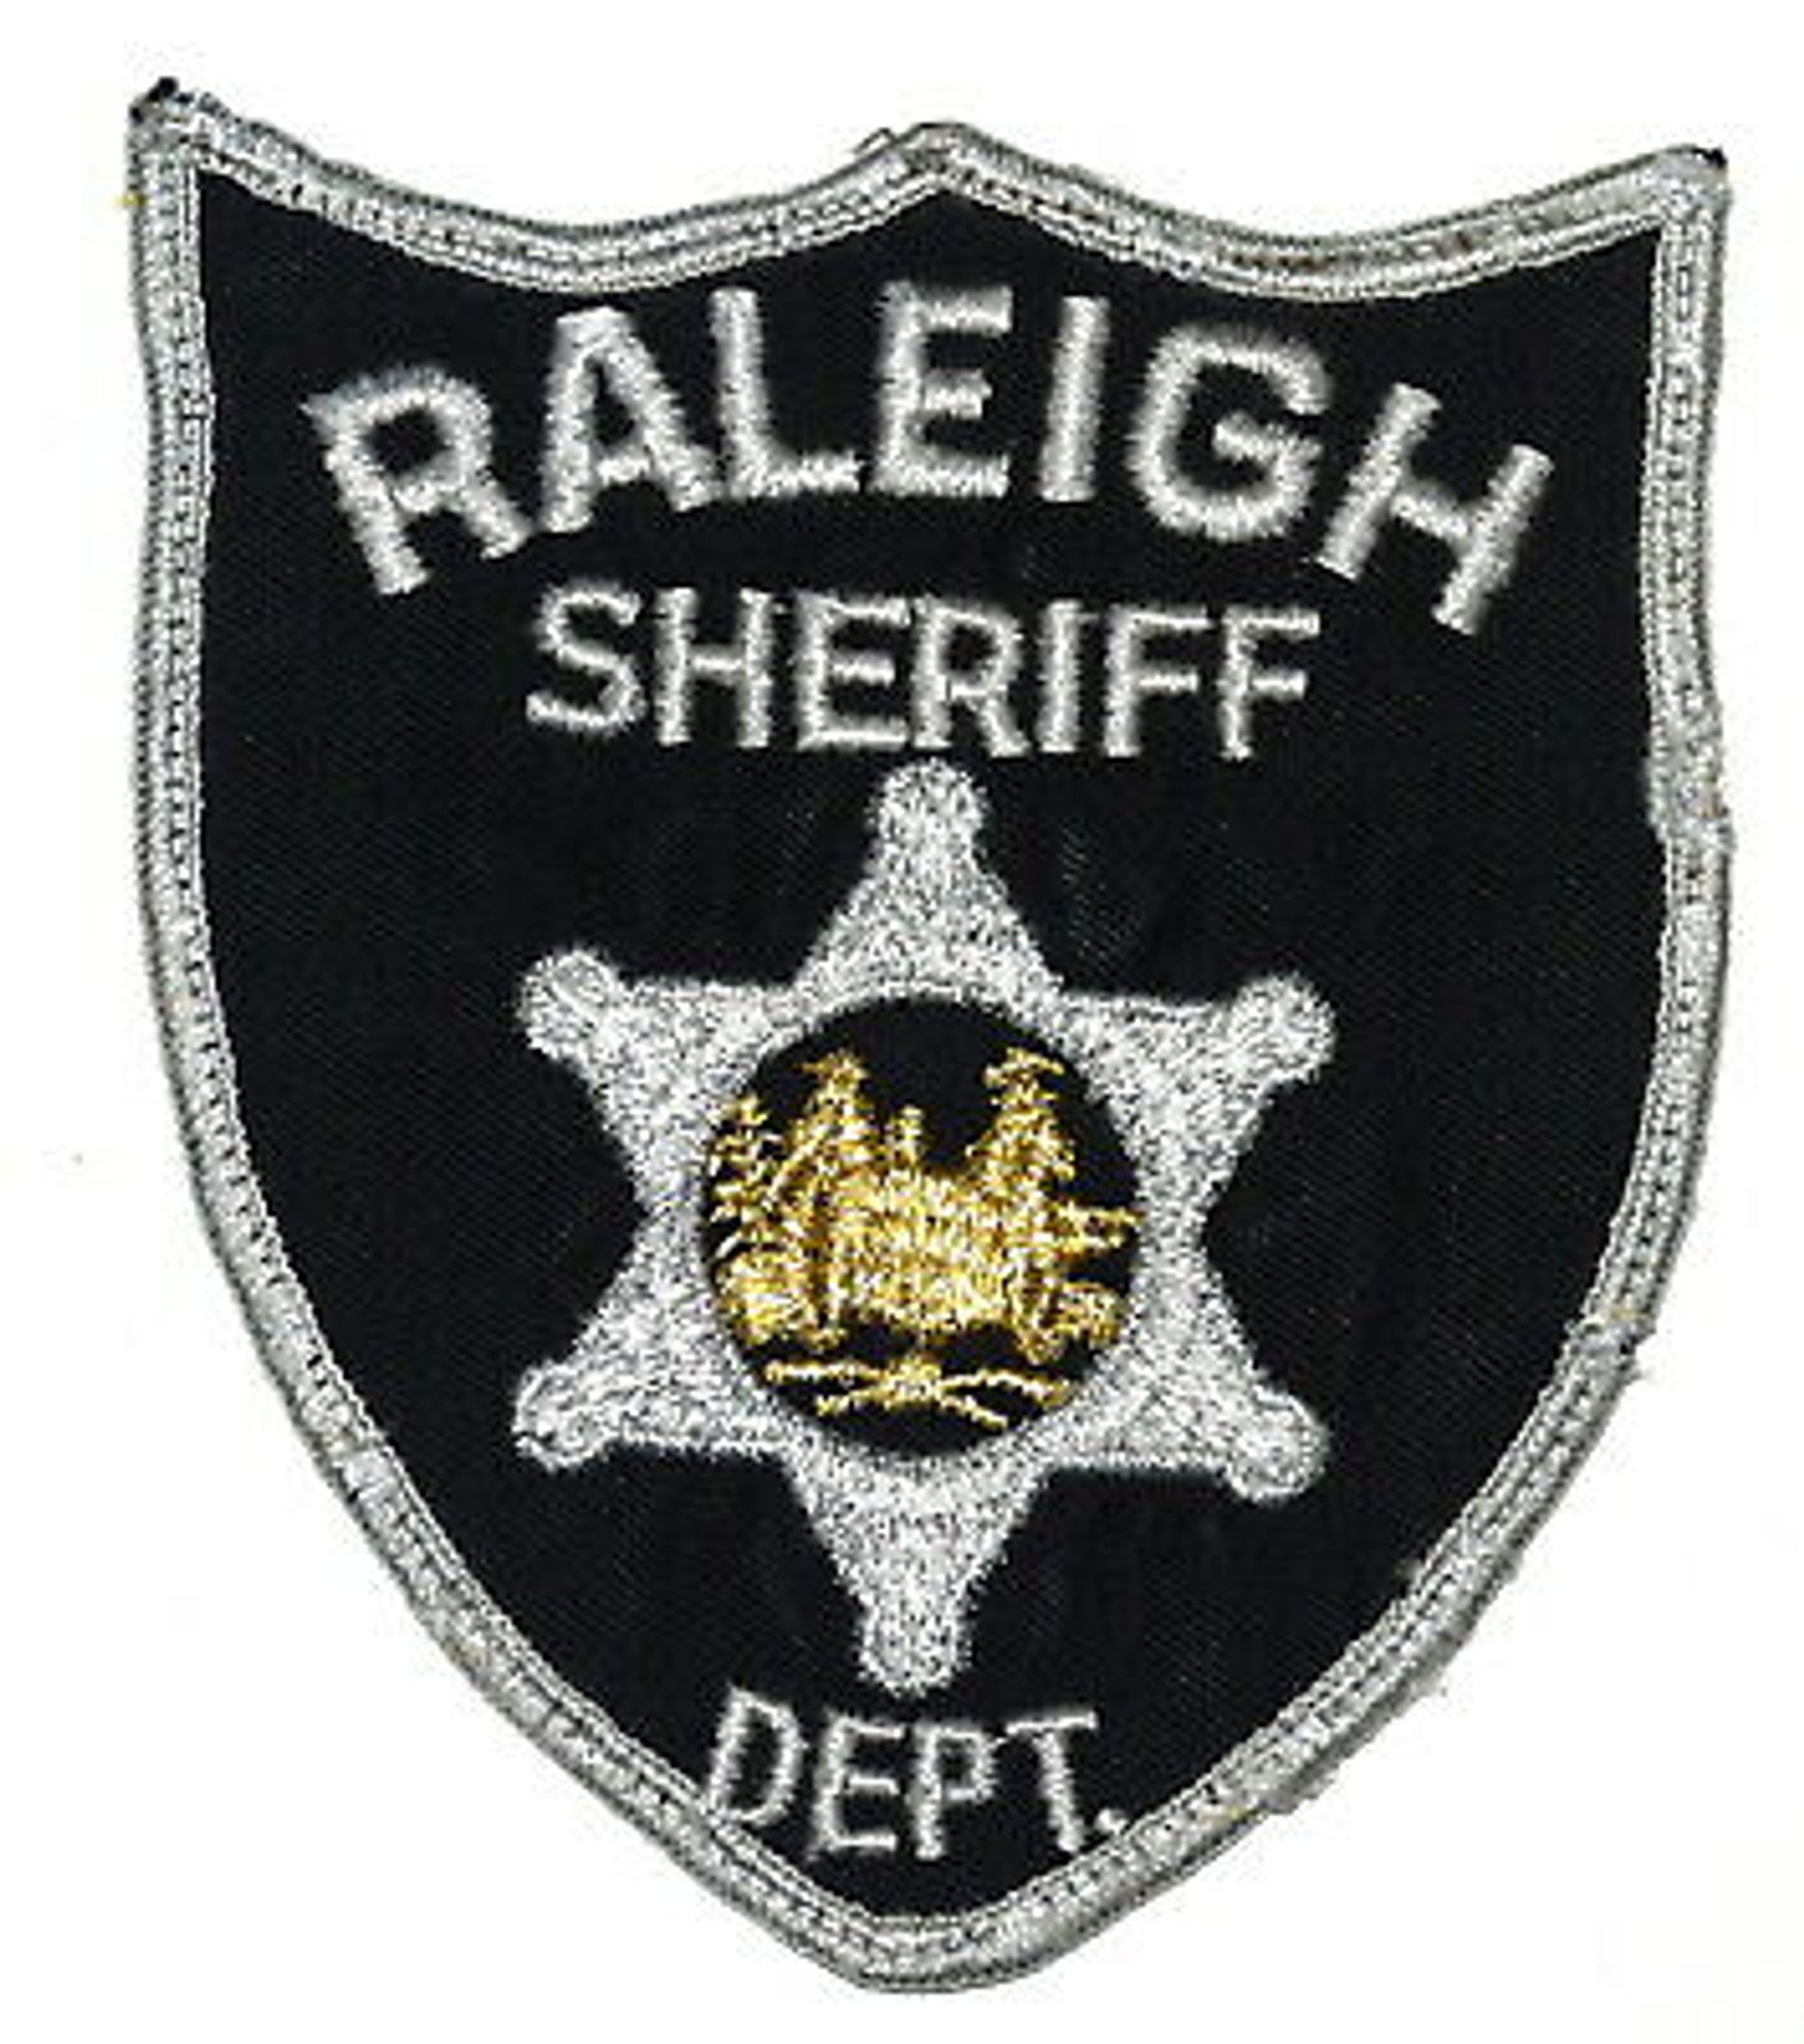 Raleigh Sheriff Dept. WV Police Patch